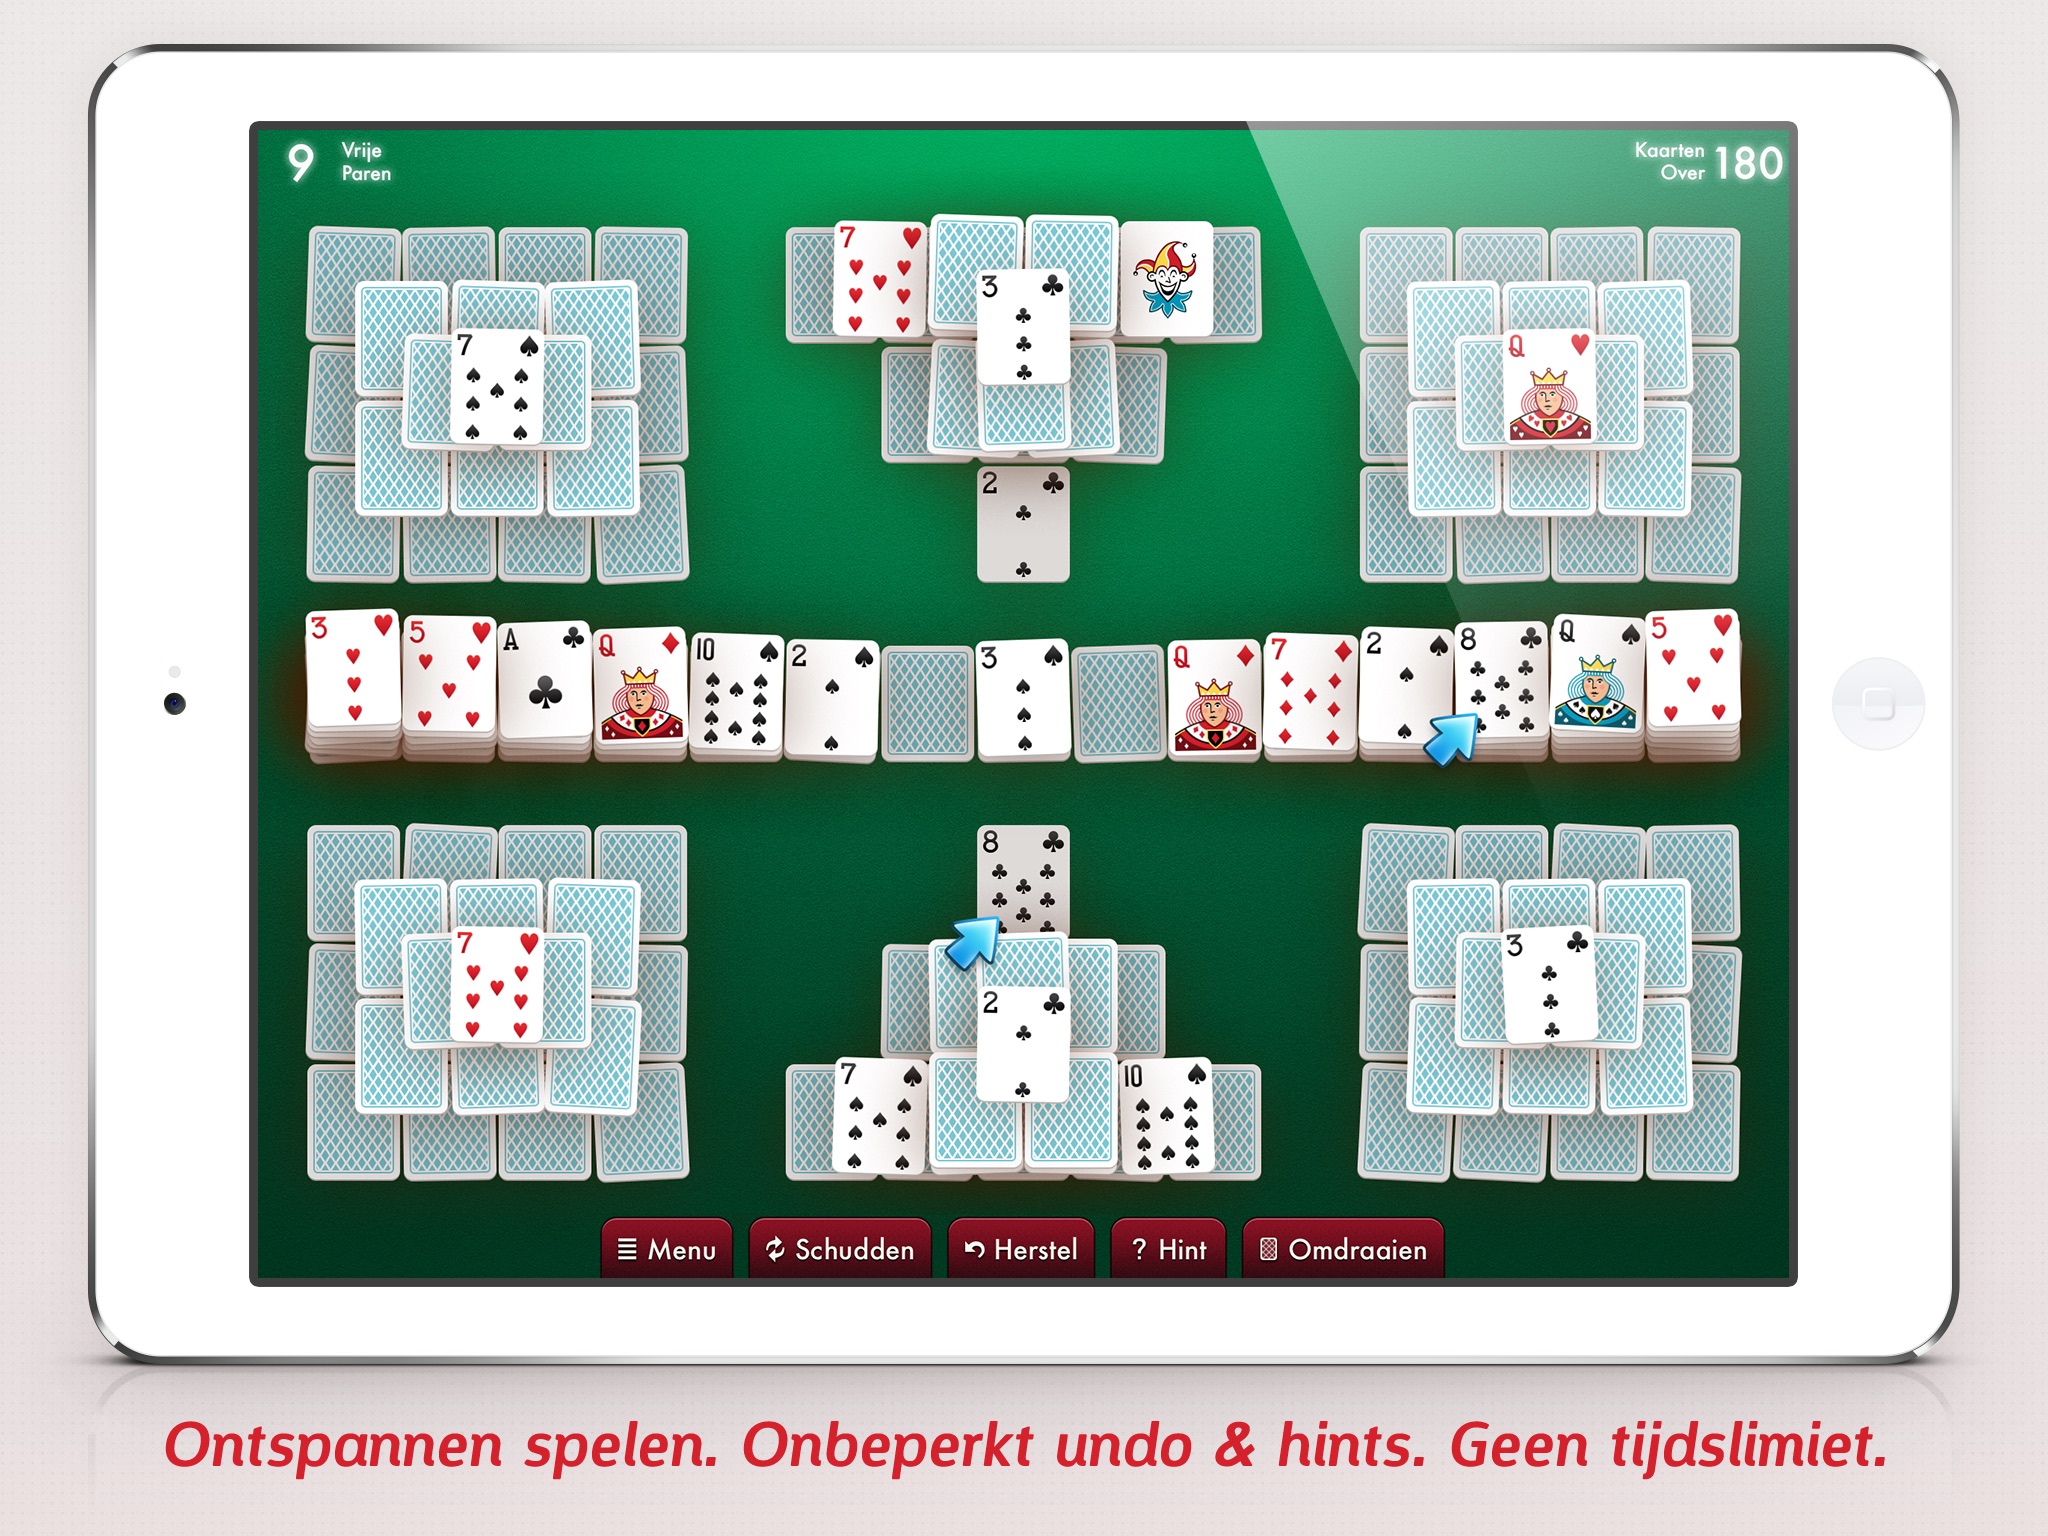 Mahjong Cards - Play classic mahjong solitaire with playing cards screenshot 2